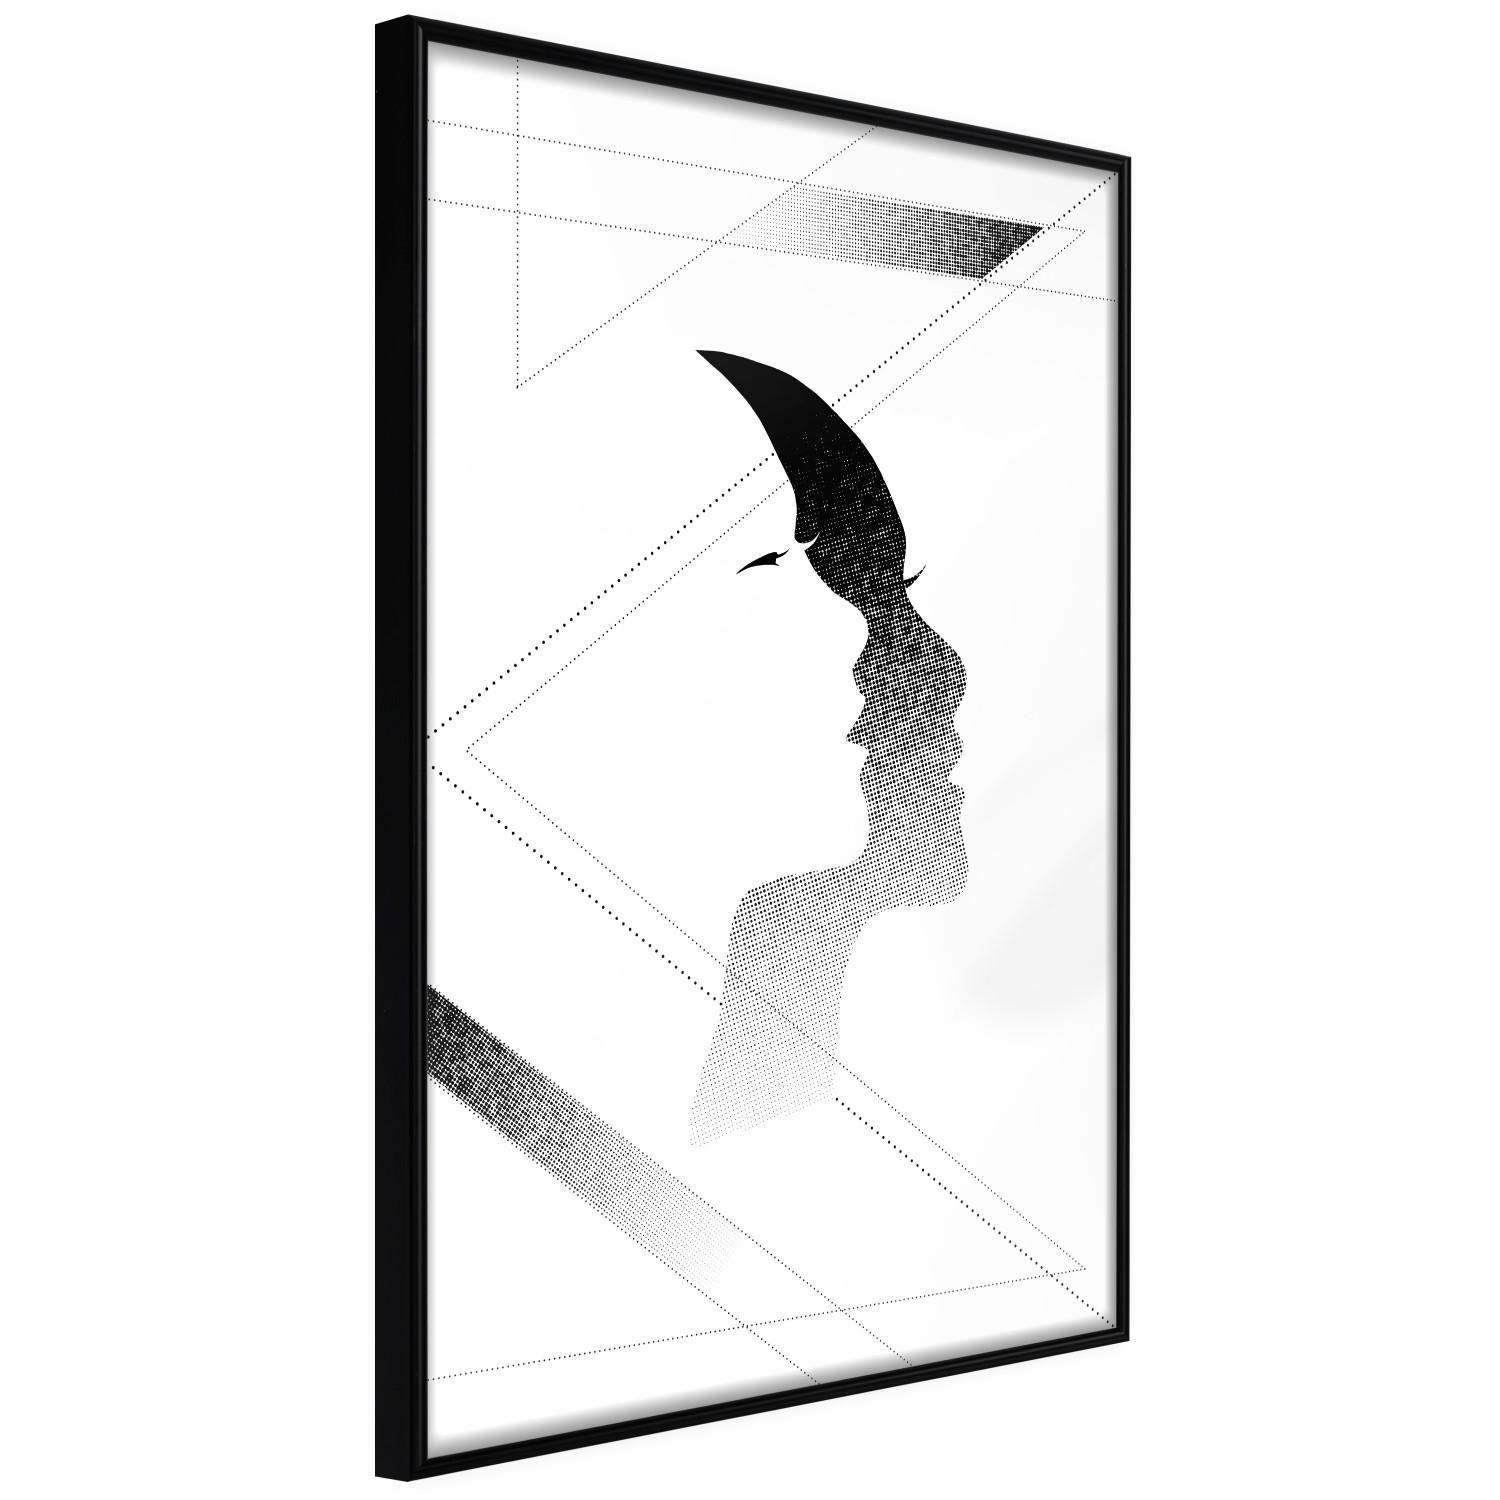 Gallery wall Woman's Shadow - geometric abstraction with a black and white woman's face